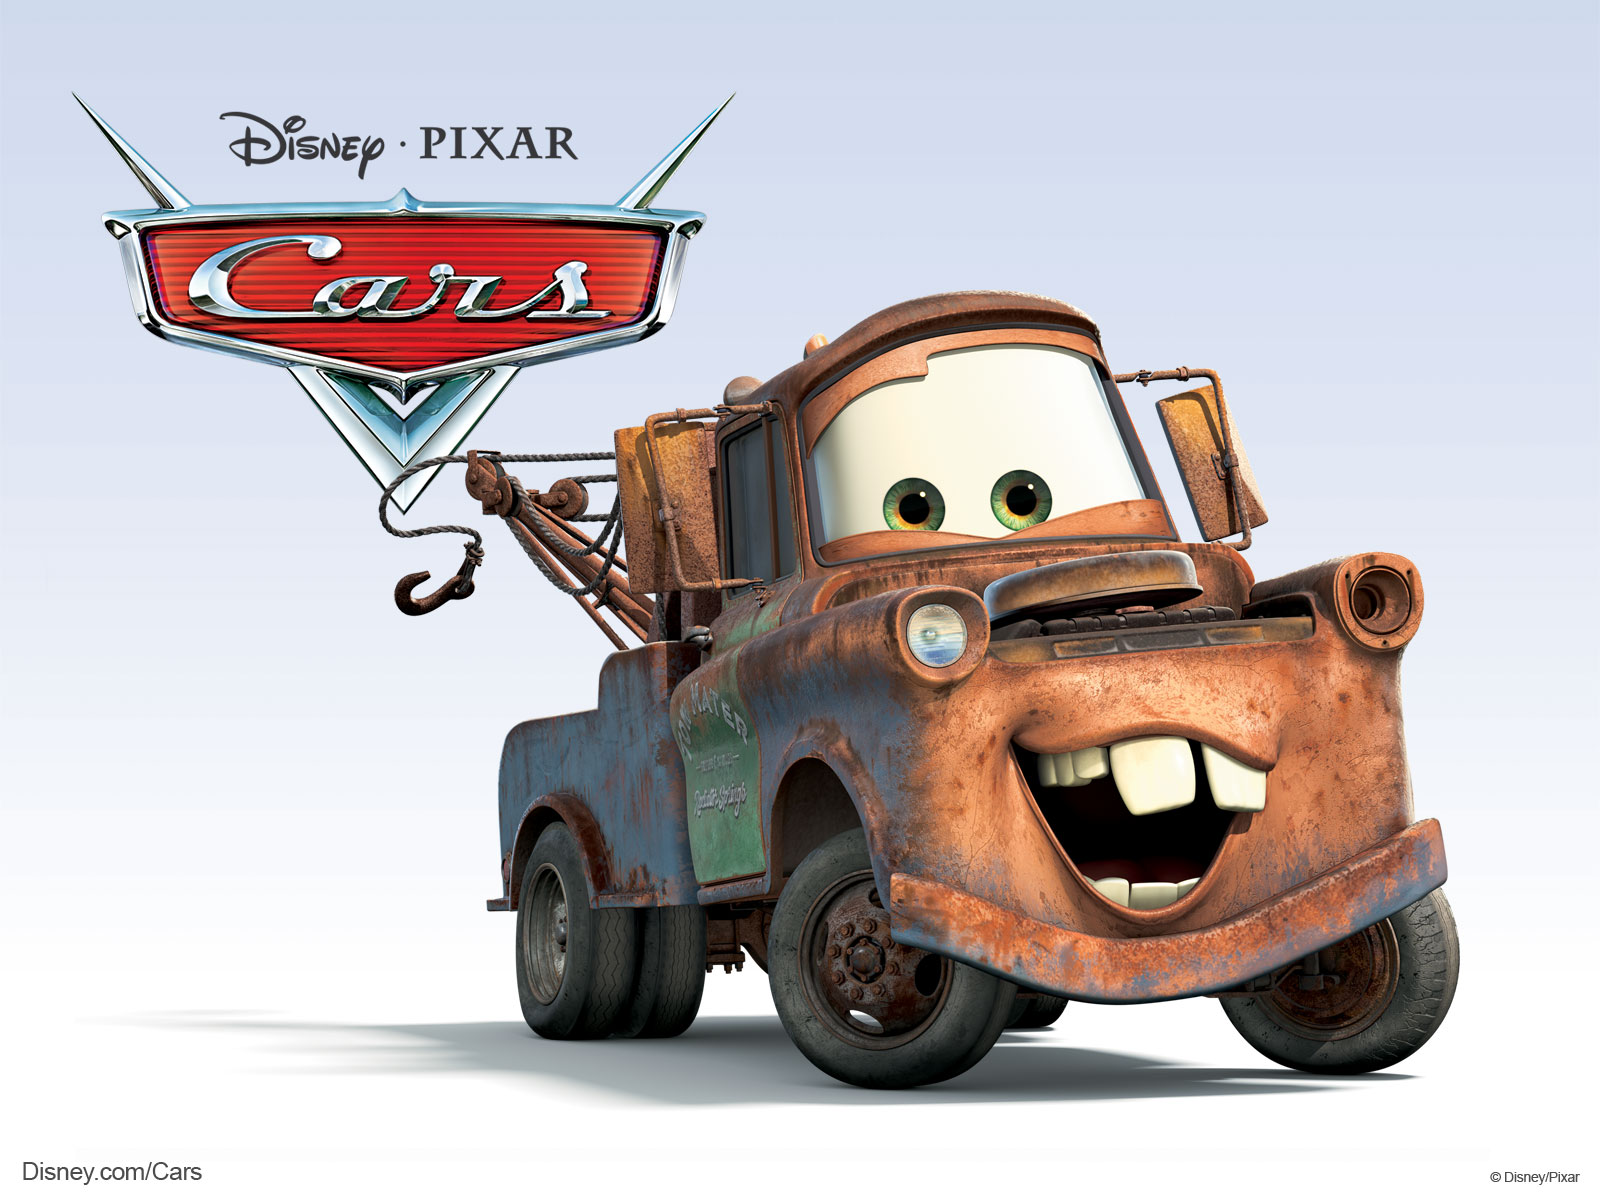 Mater The Tow Truck From Disney-pixar Cars Movie Wallpaper - Mater Cars , HD Wallpaper & Backgrounds